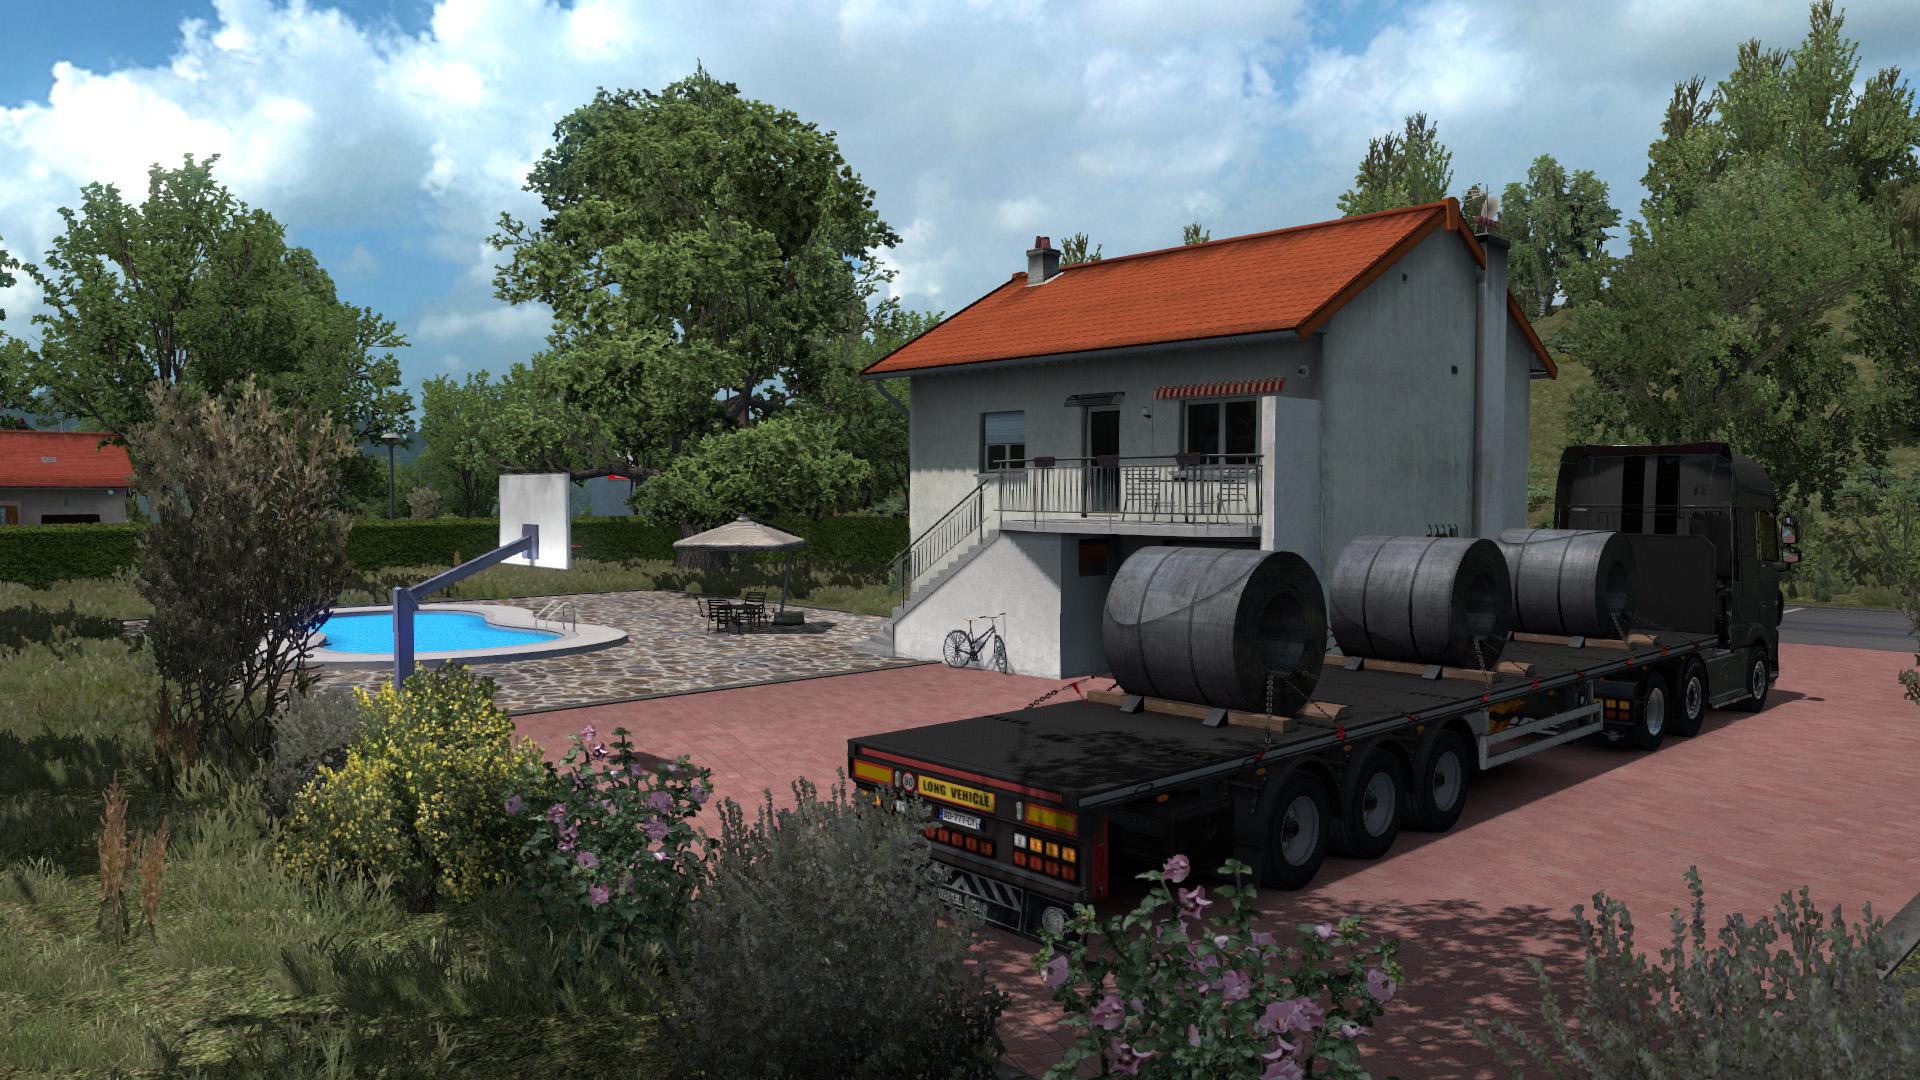 Warehouse & House in Epinal v1.0